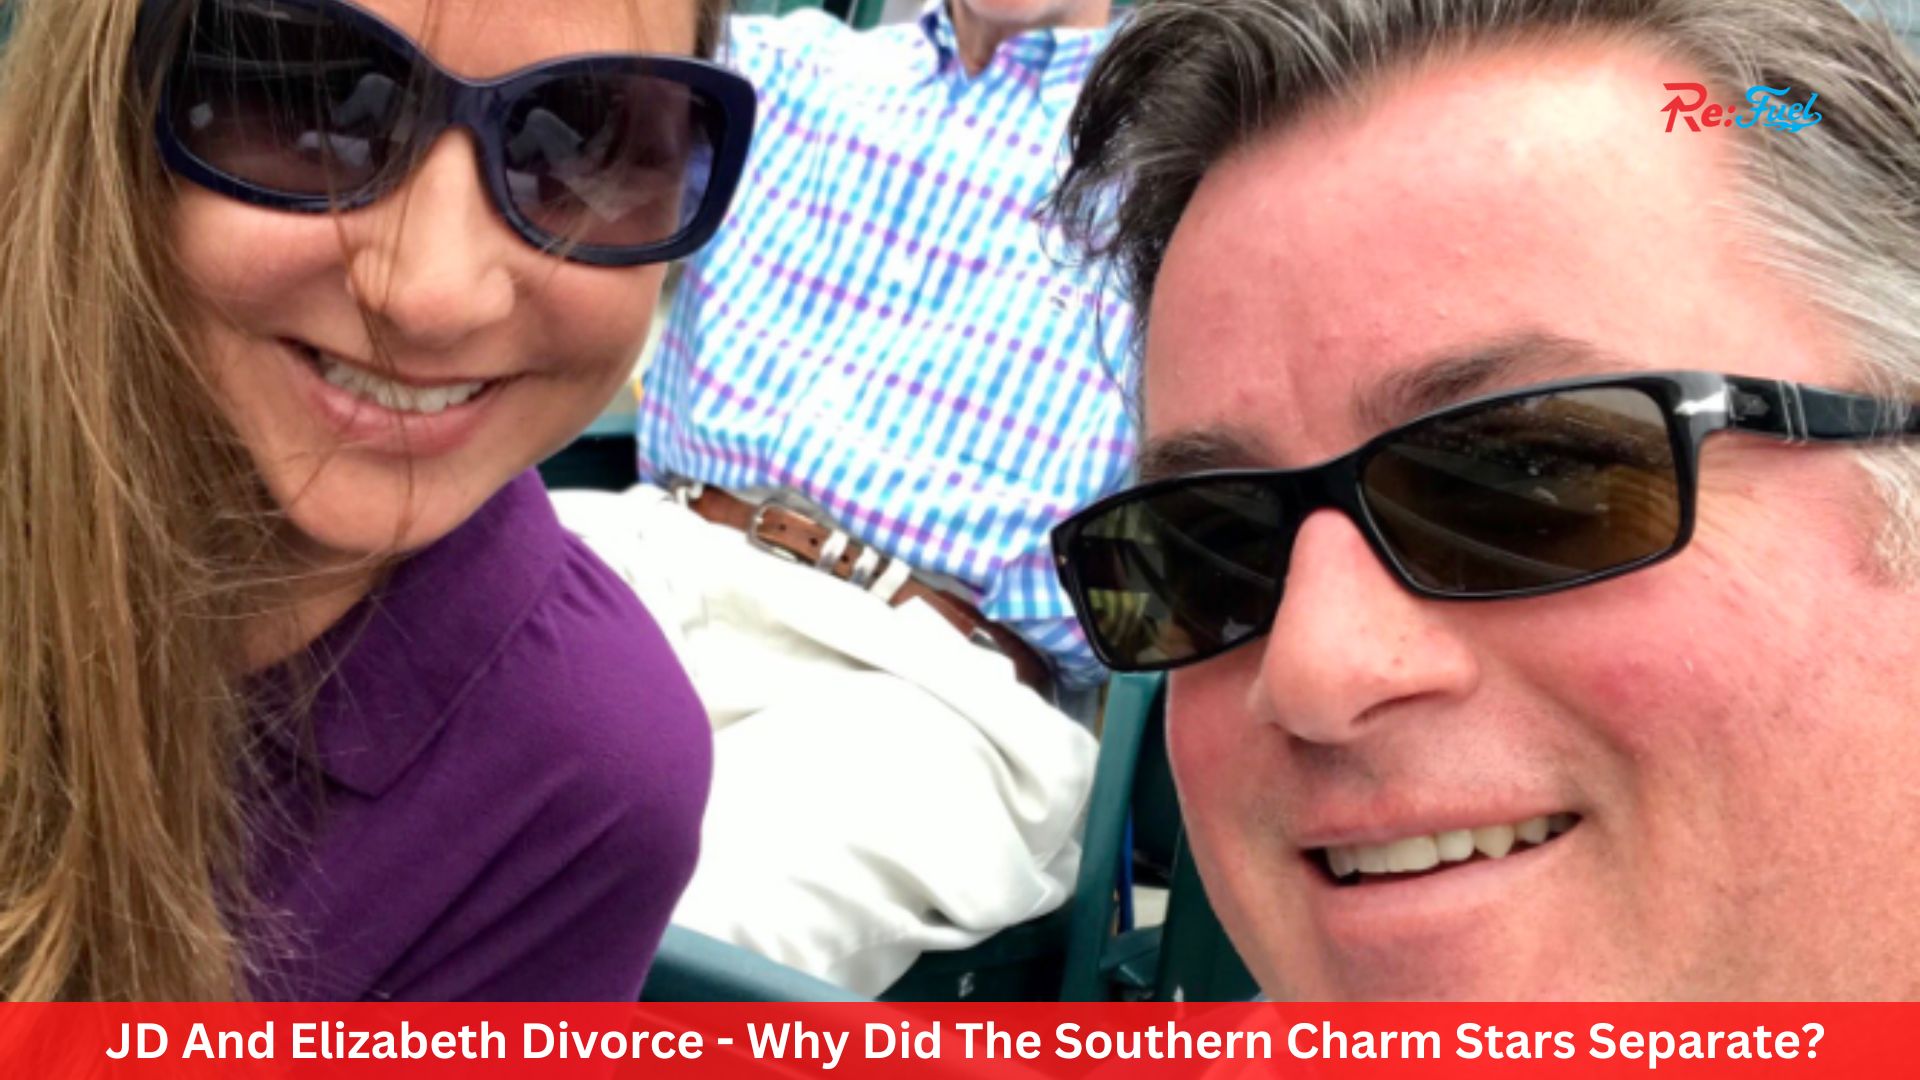 JD And Elizabeth Divorce - Why Did The Southern Charm Stars Separate?